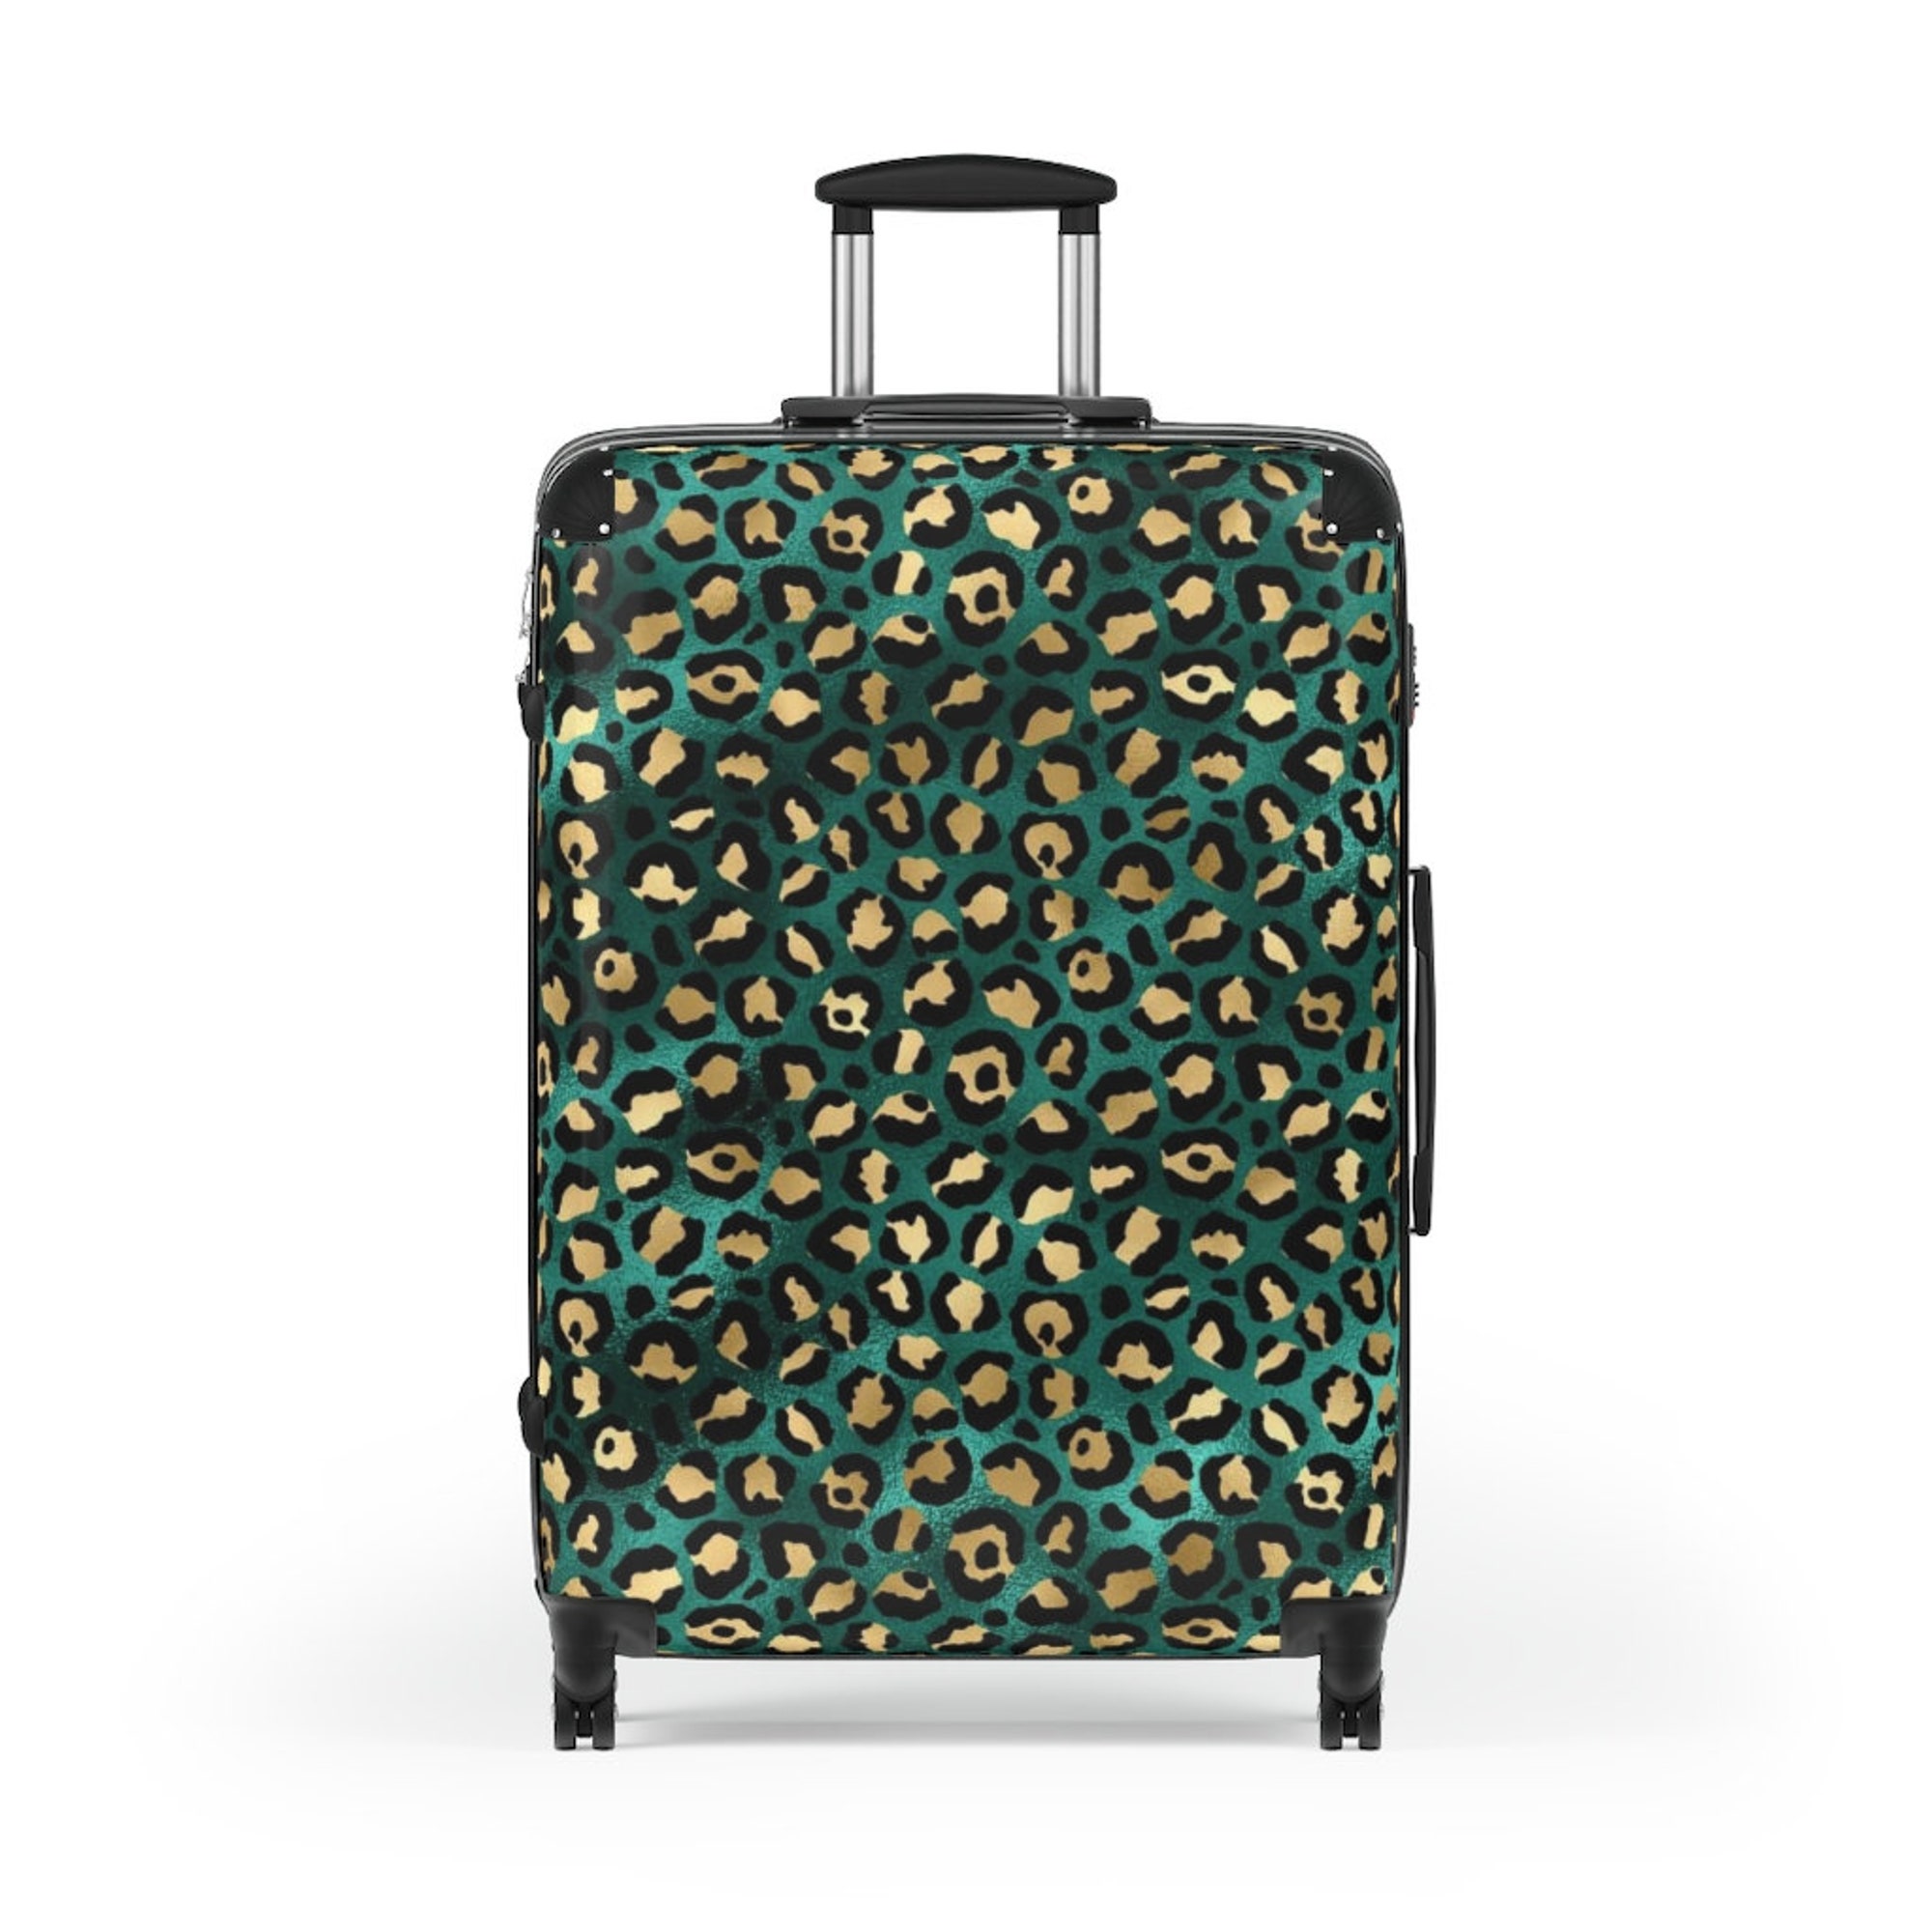 Discover The Green Envy Leopard Suitcase